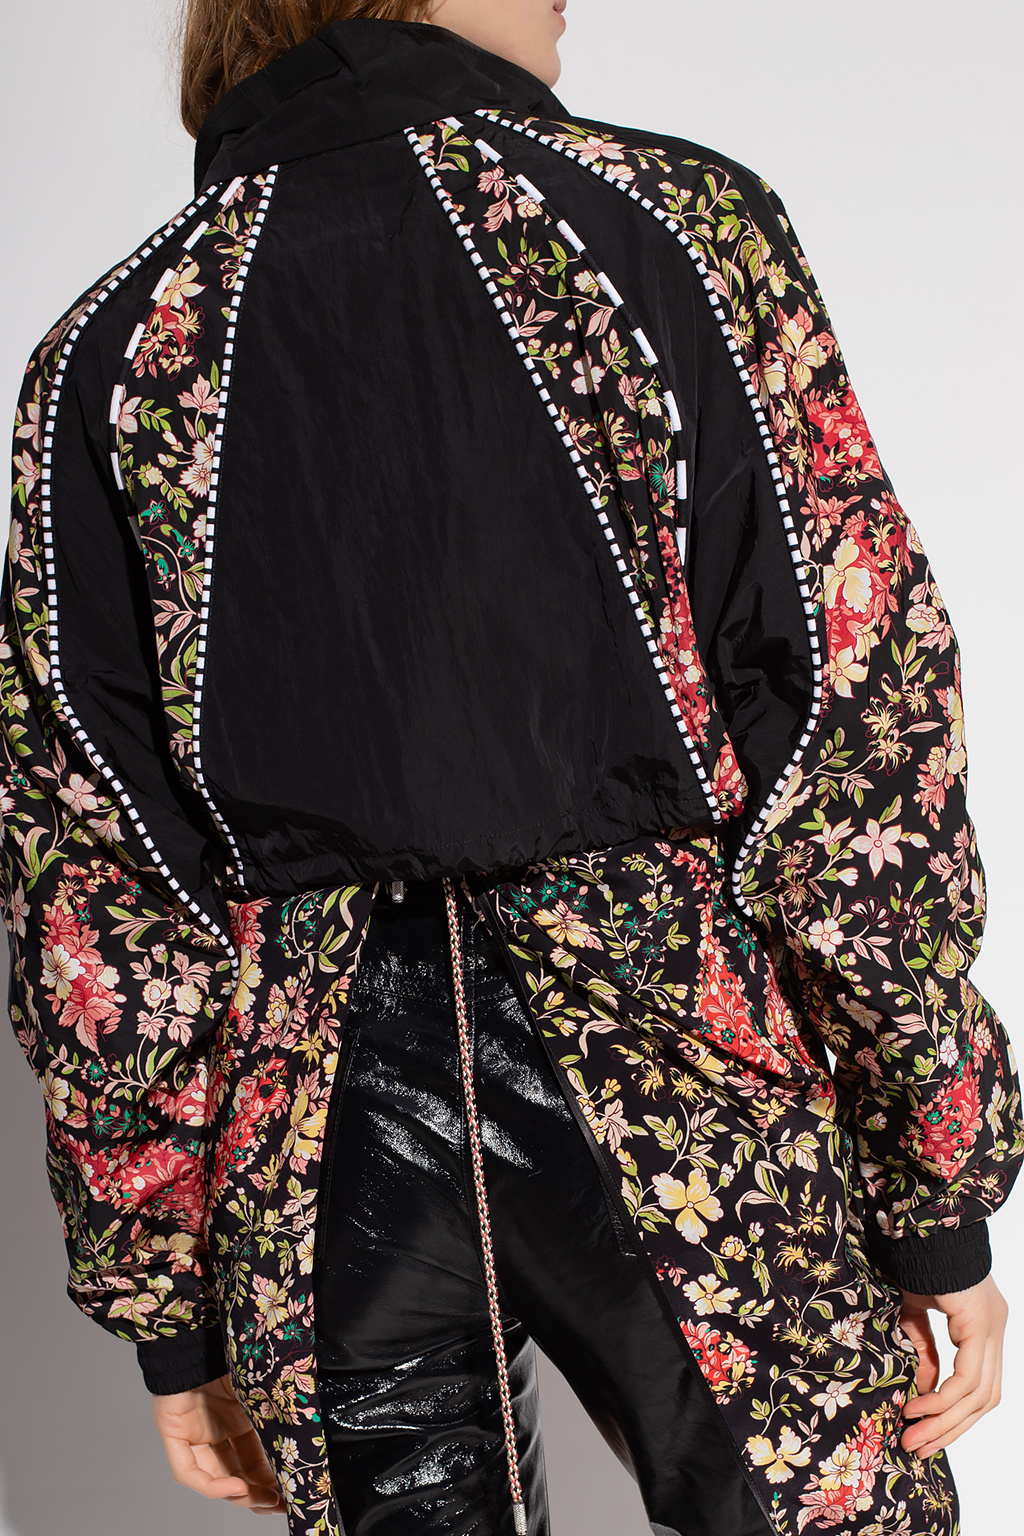 Etro Cropped jacket with floral motif